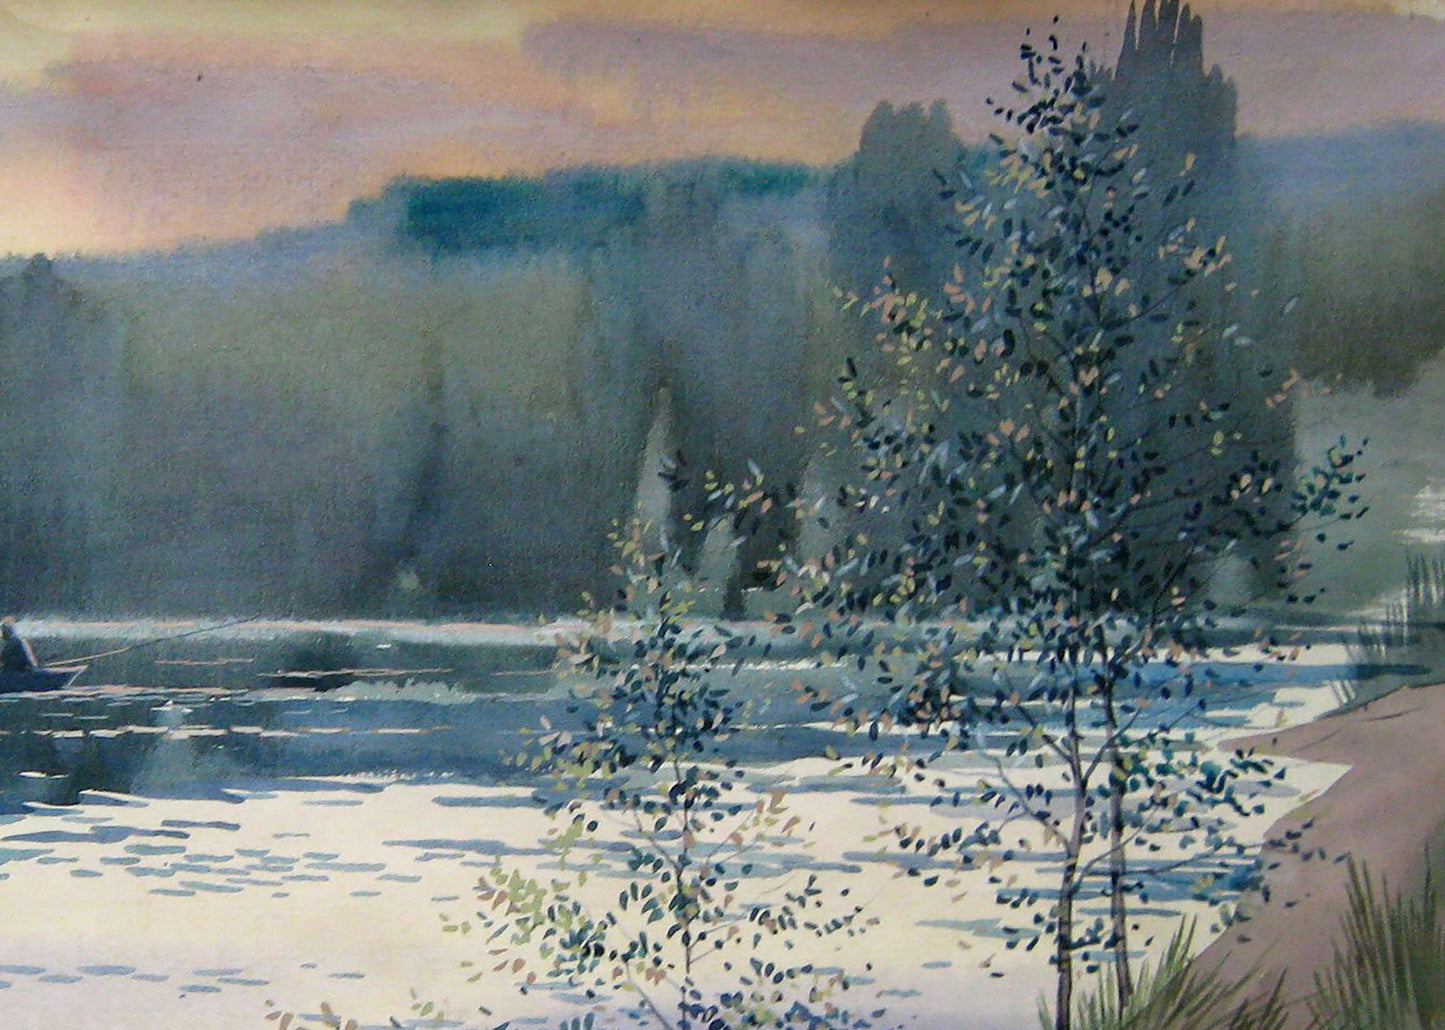 The Evening is Quiet, a watercolor by Valery Savenets